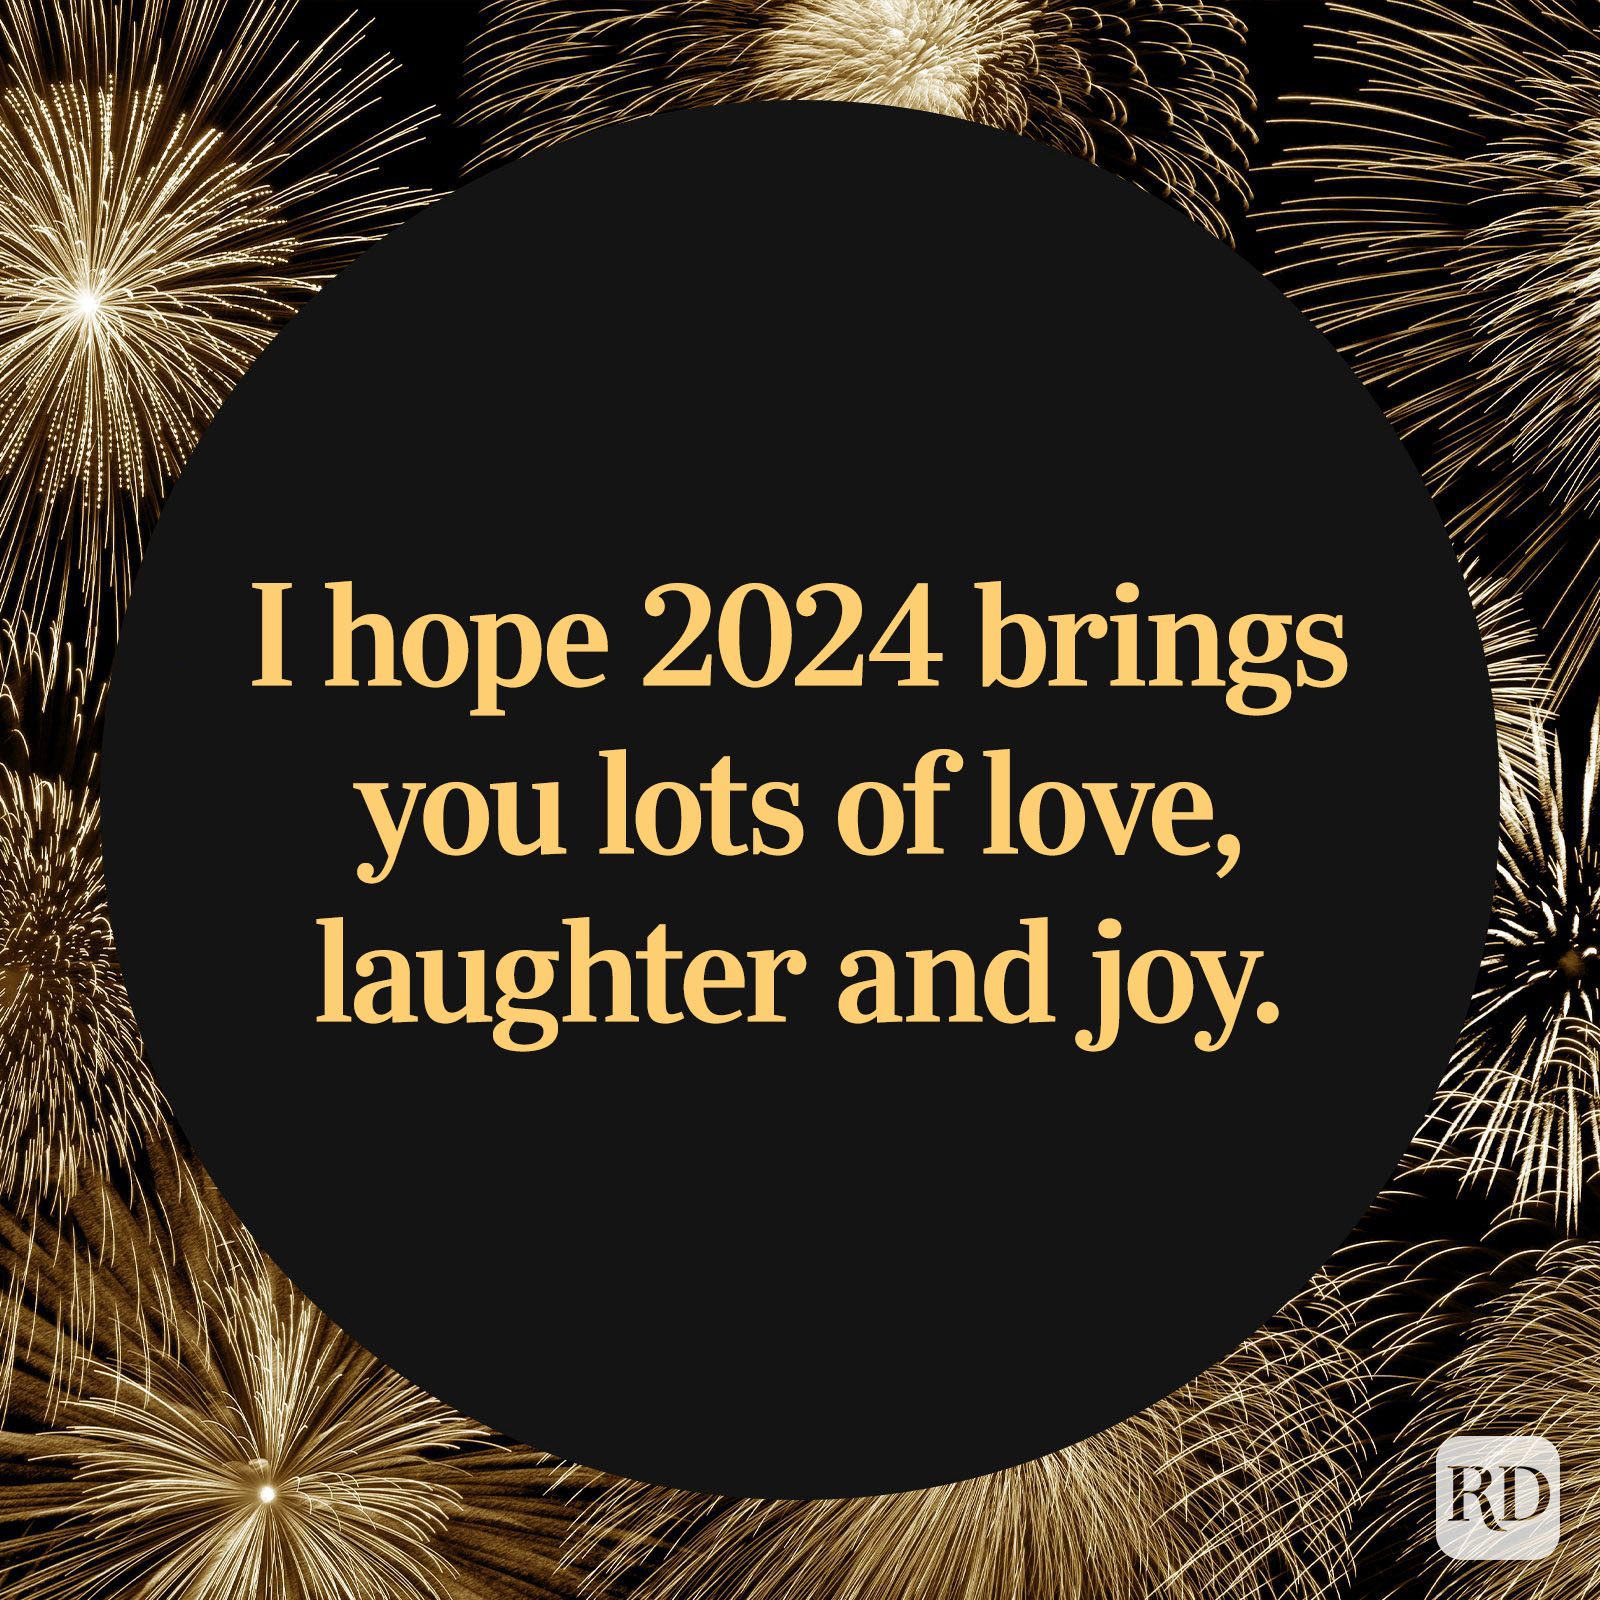 100 Happy New Year Wishes and Sayings for 2024